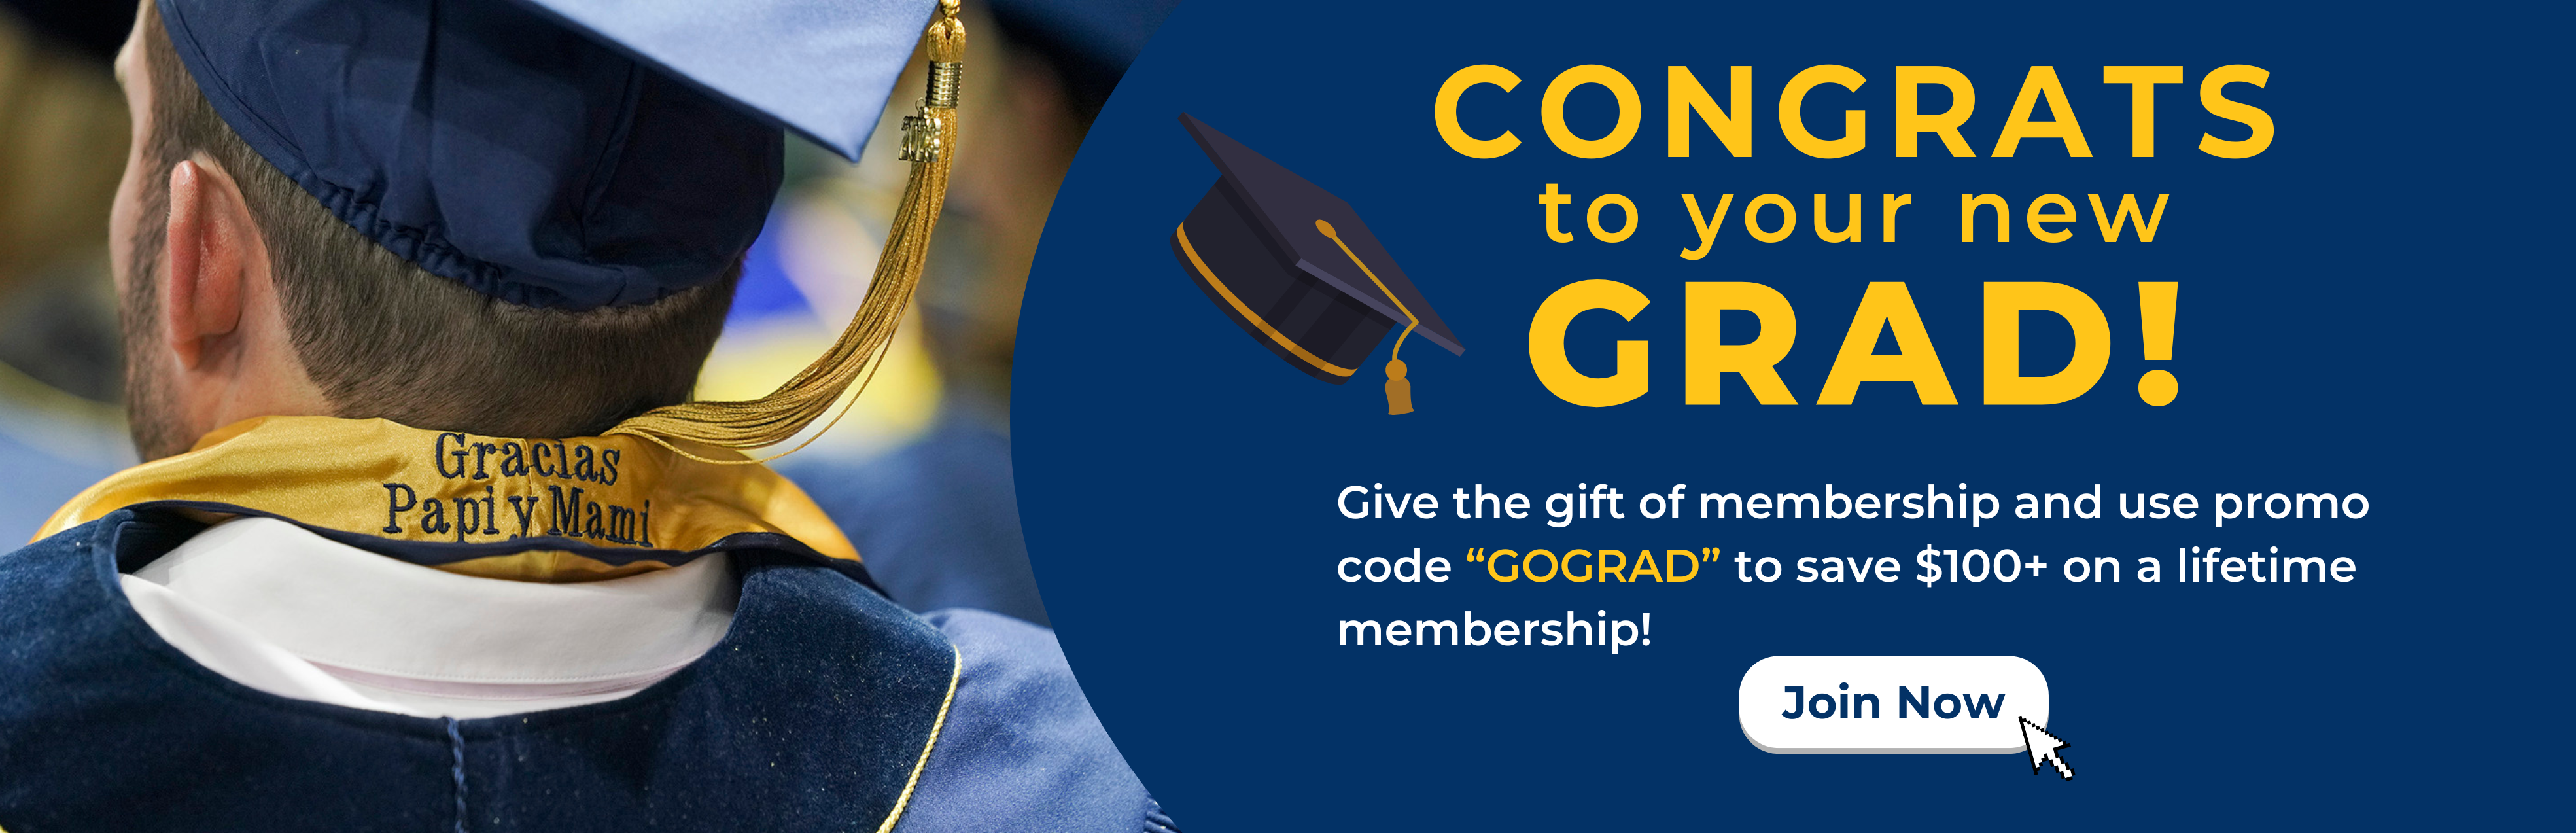 Gift a membership to Your New Aggie Graduate!